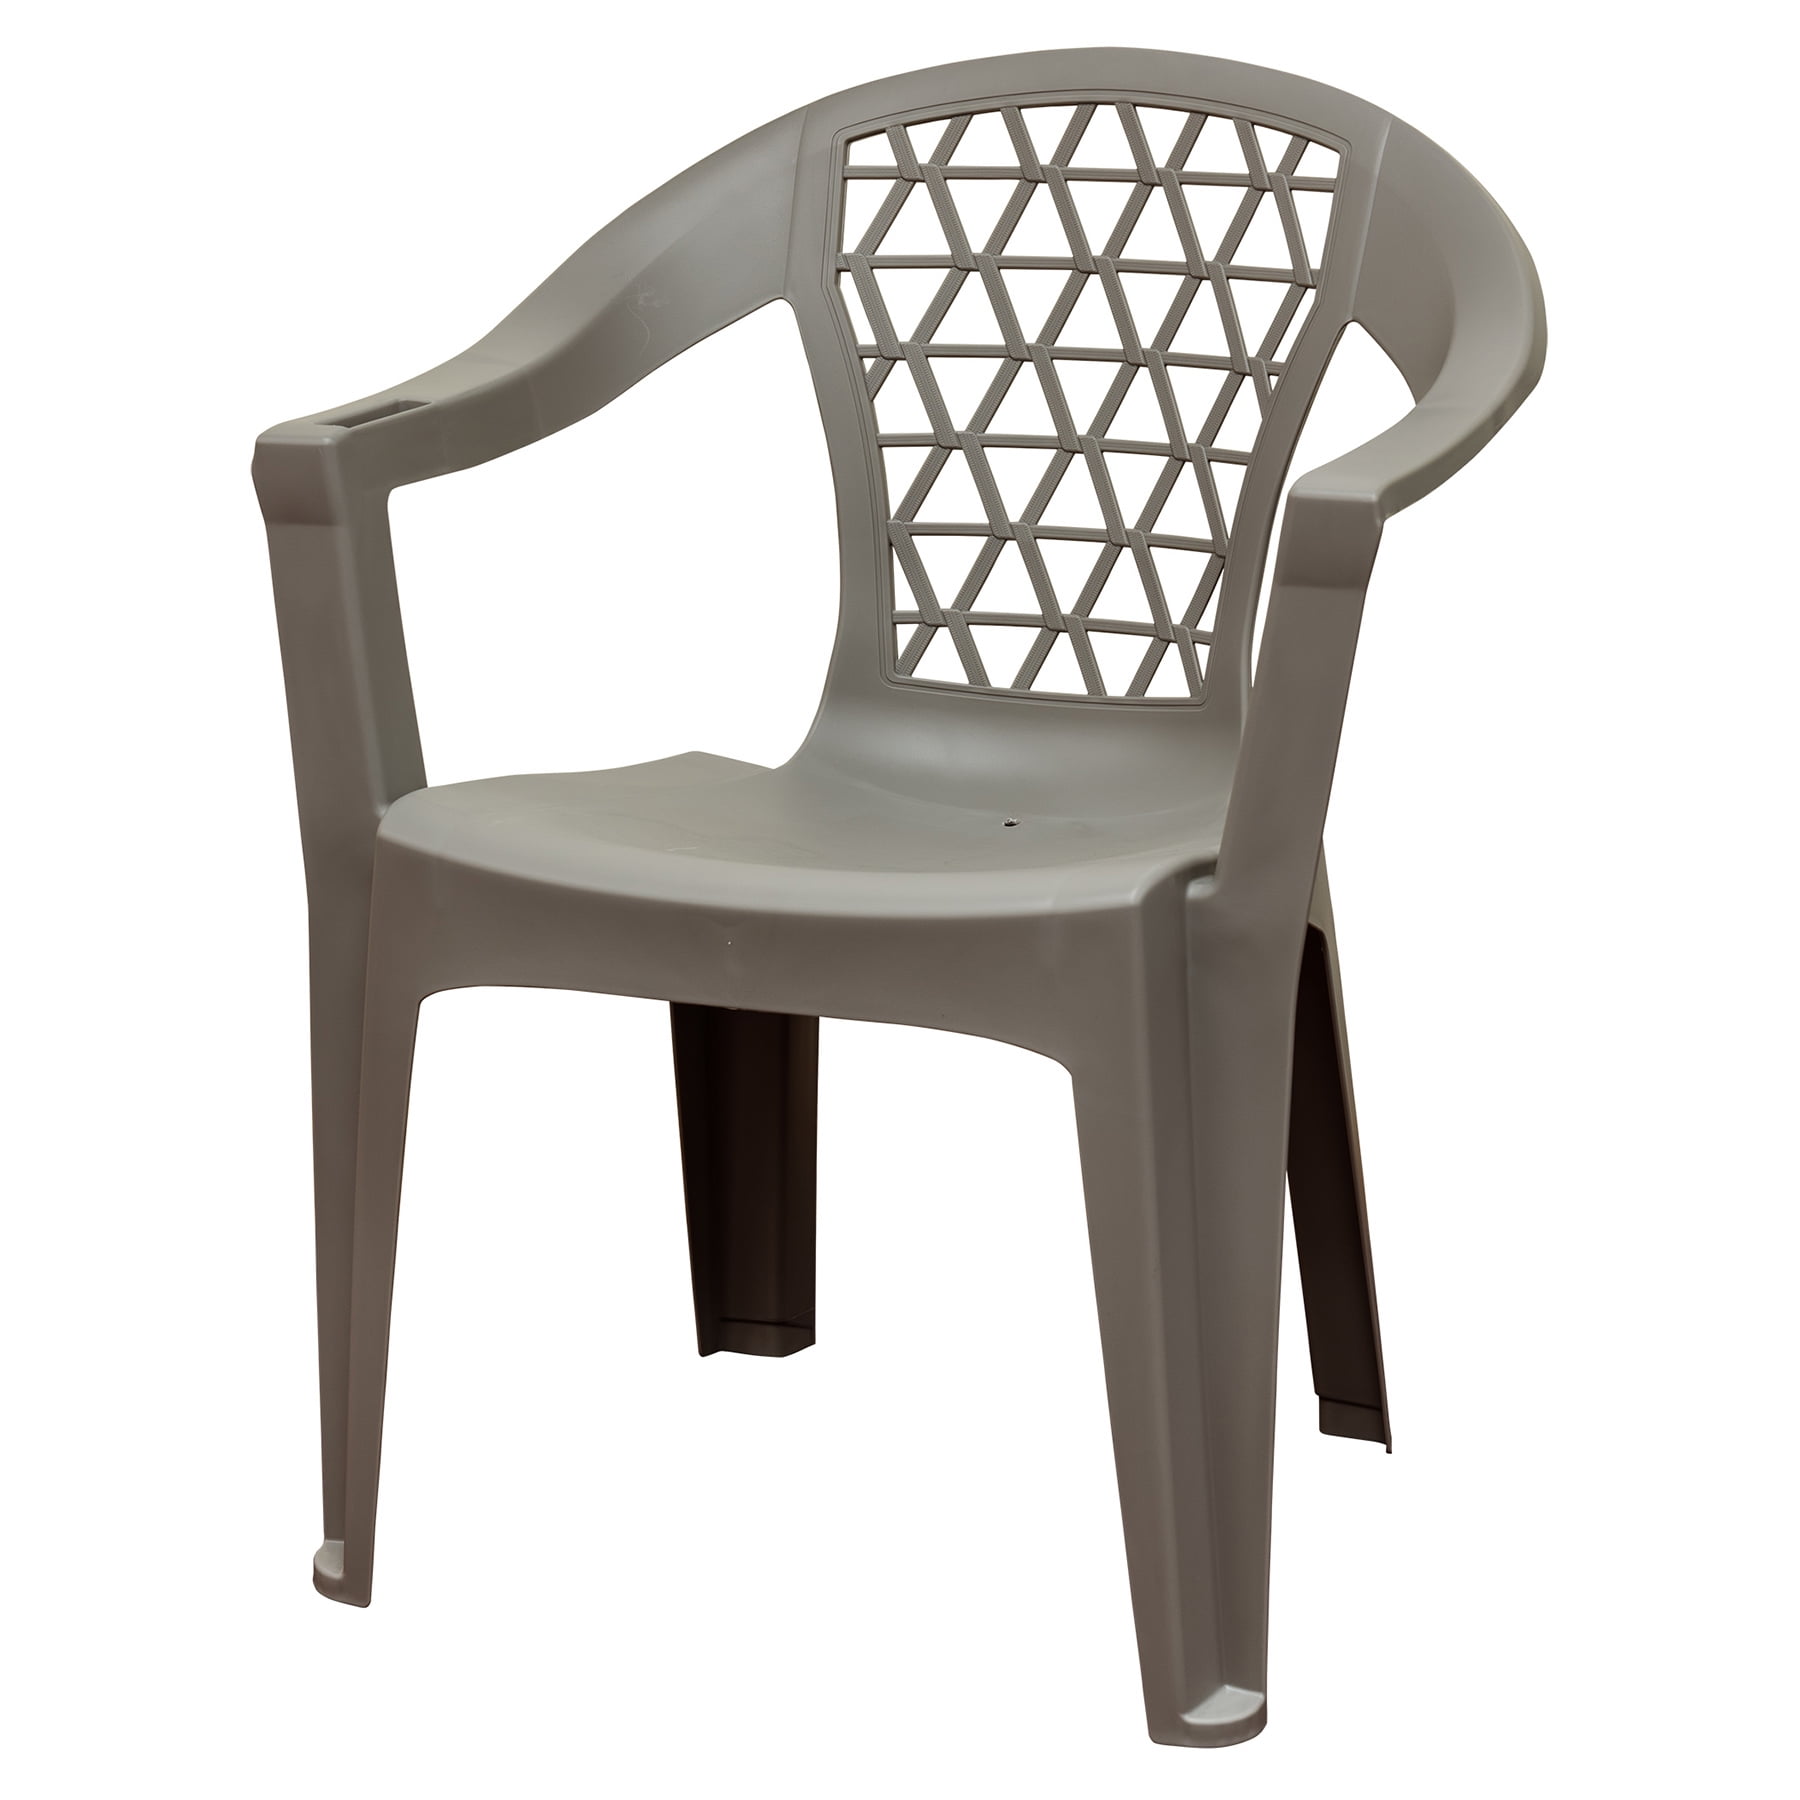 Adams Penza Outdoor Resin Stack Chair with Phone Holder, Plastic Patio Furniture, Gray